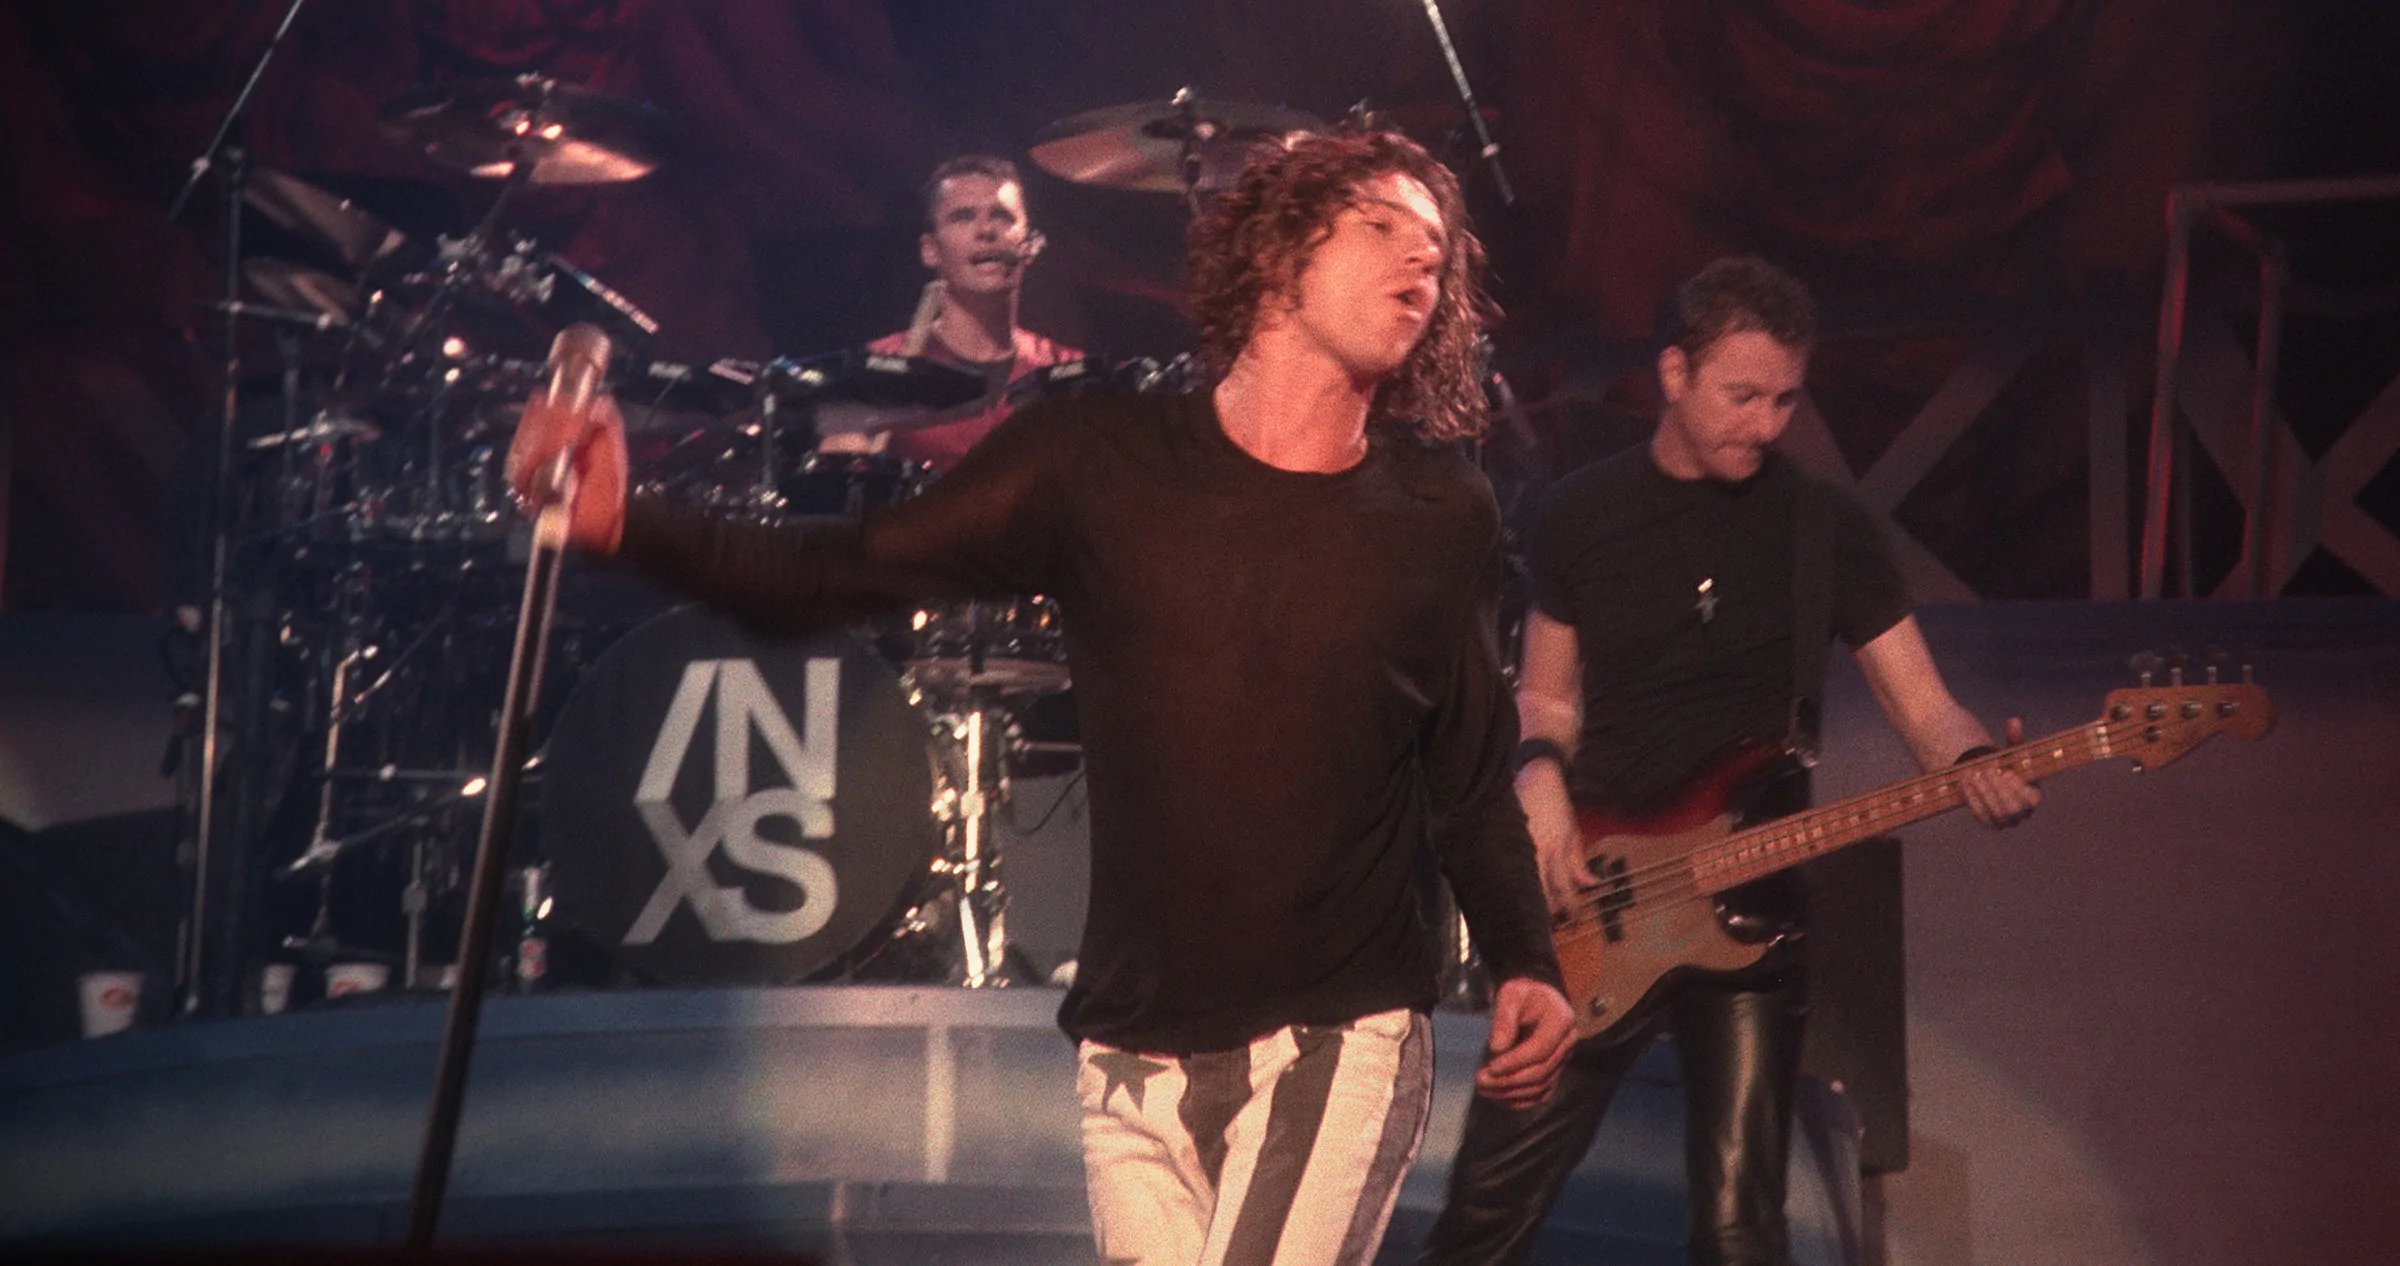 INXS announce the release of ‘Live Baby Live’ in 4K Ultra High Definition on June 26th